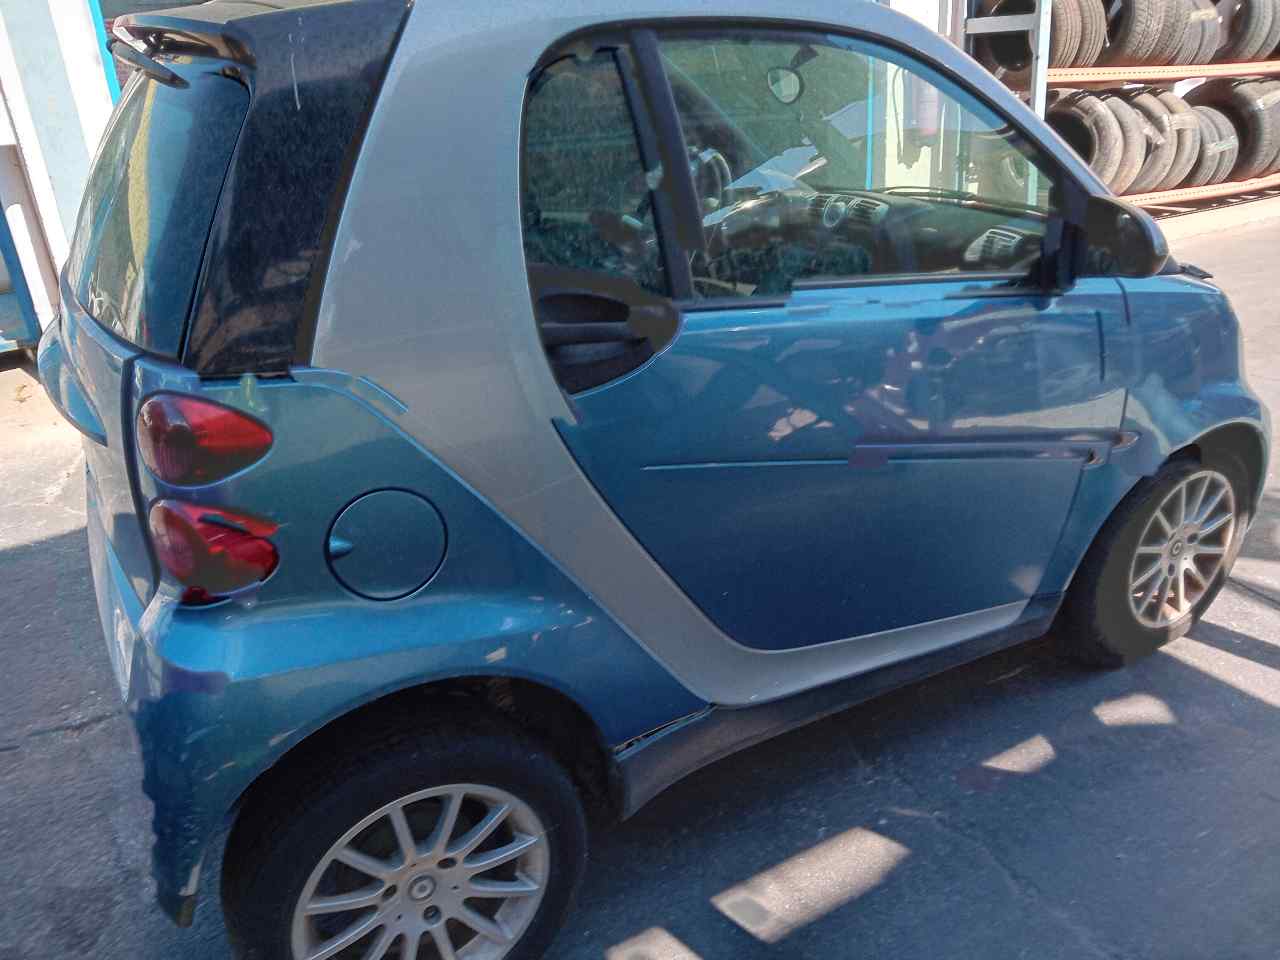 SMART Fortwo 2 generation (2007-2015) Бабина 183A028 25304065